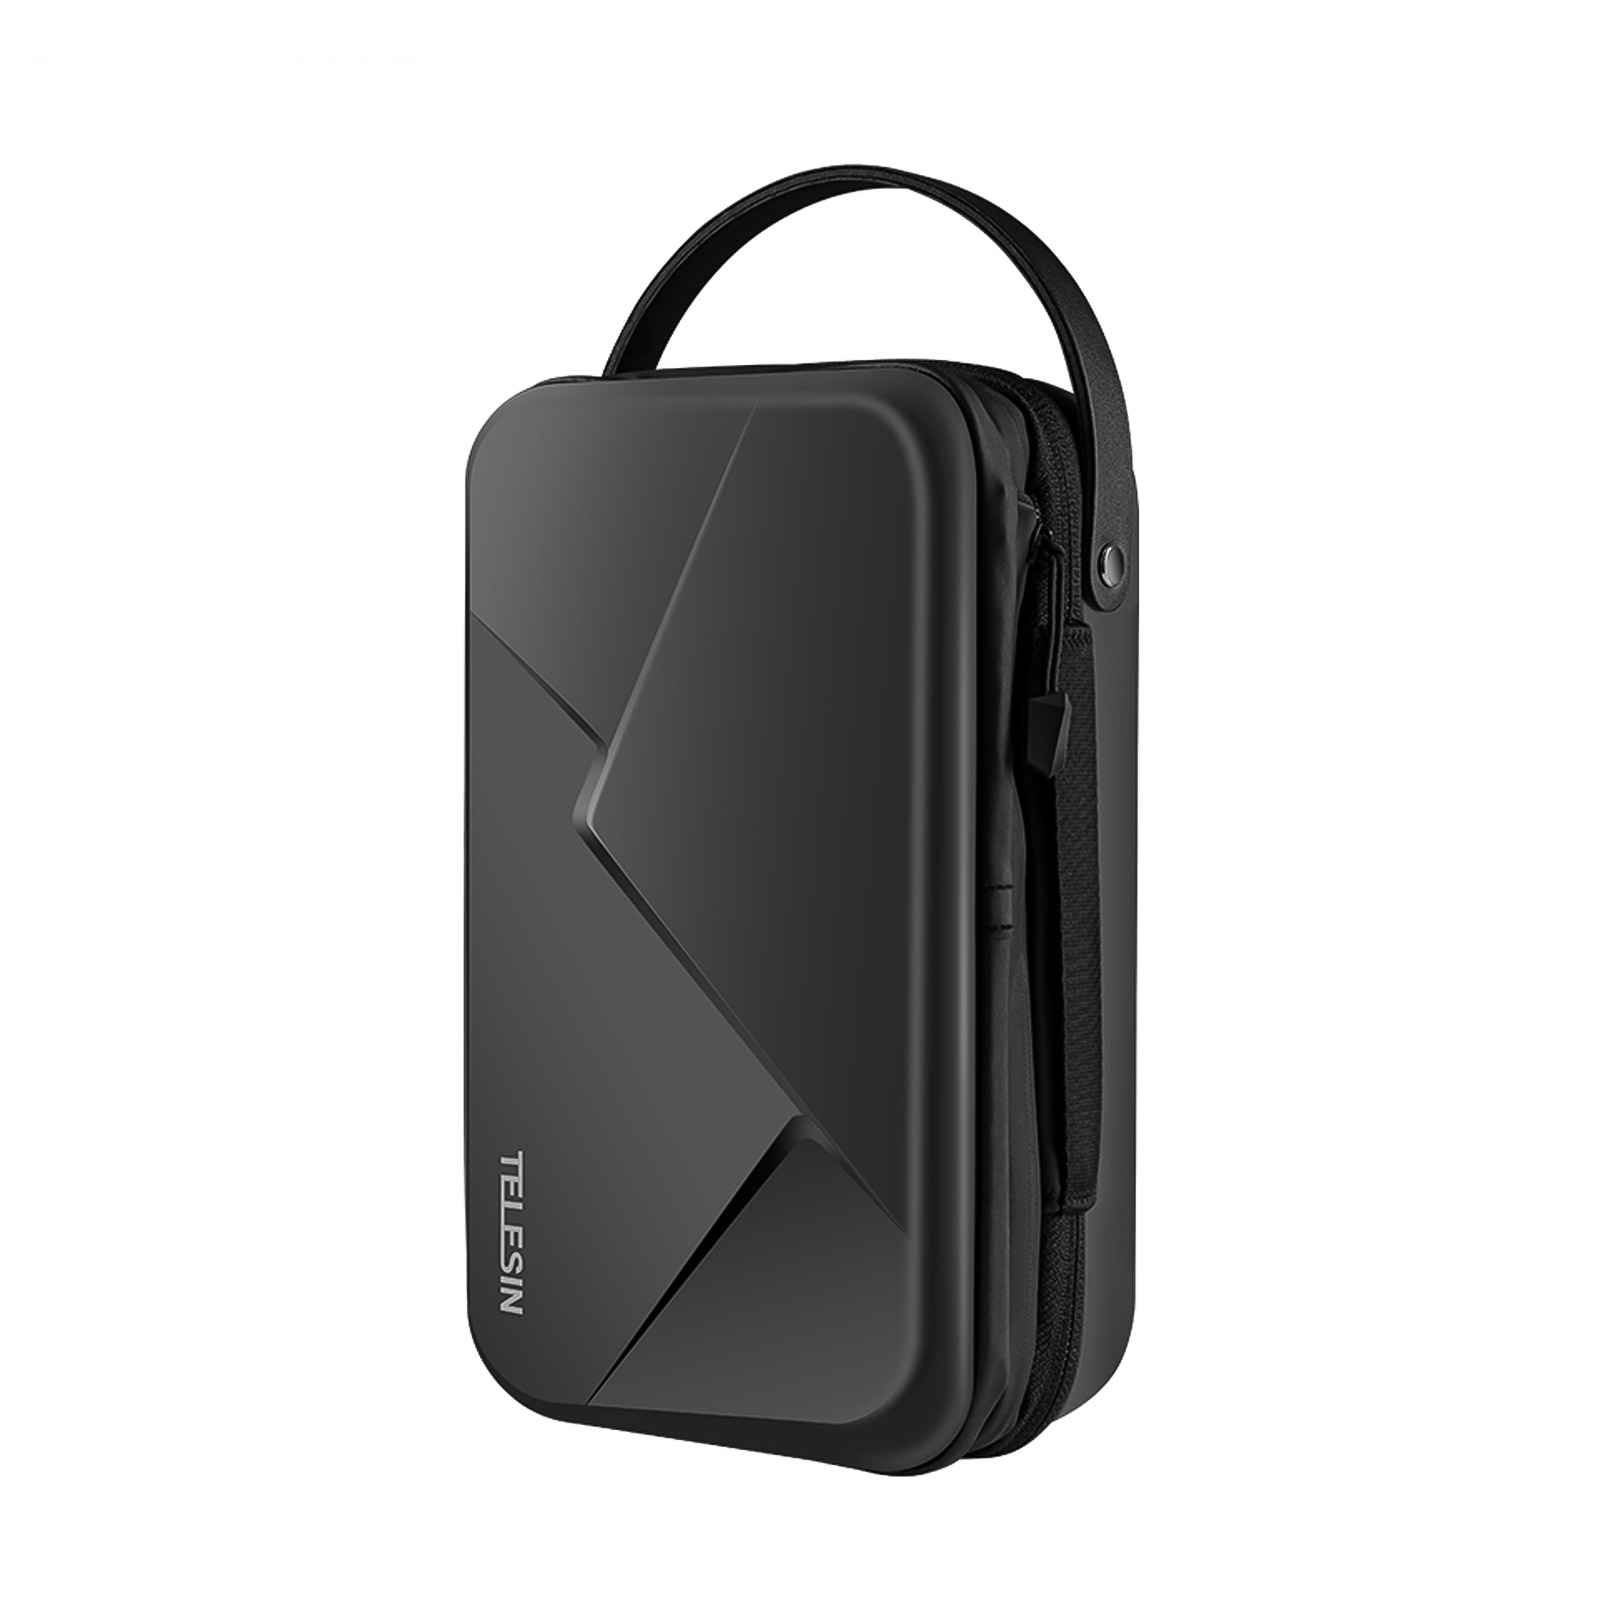 7299 Waterproof Action Hard Carrying Case Storage Box Protective Bag Extensible Large Capacity with Straps Compatible with Hero 5678 Black Osmo Action One ROne X - image 1 of 7